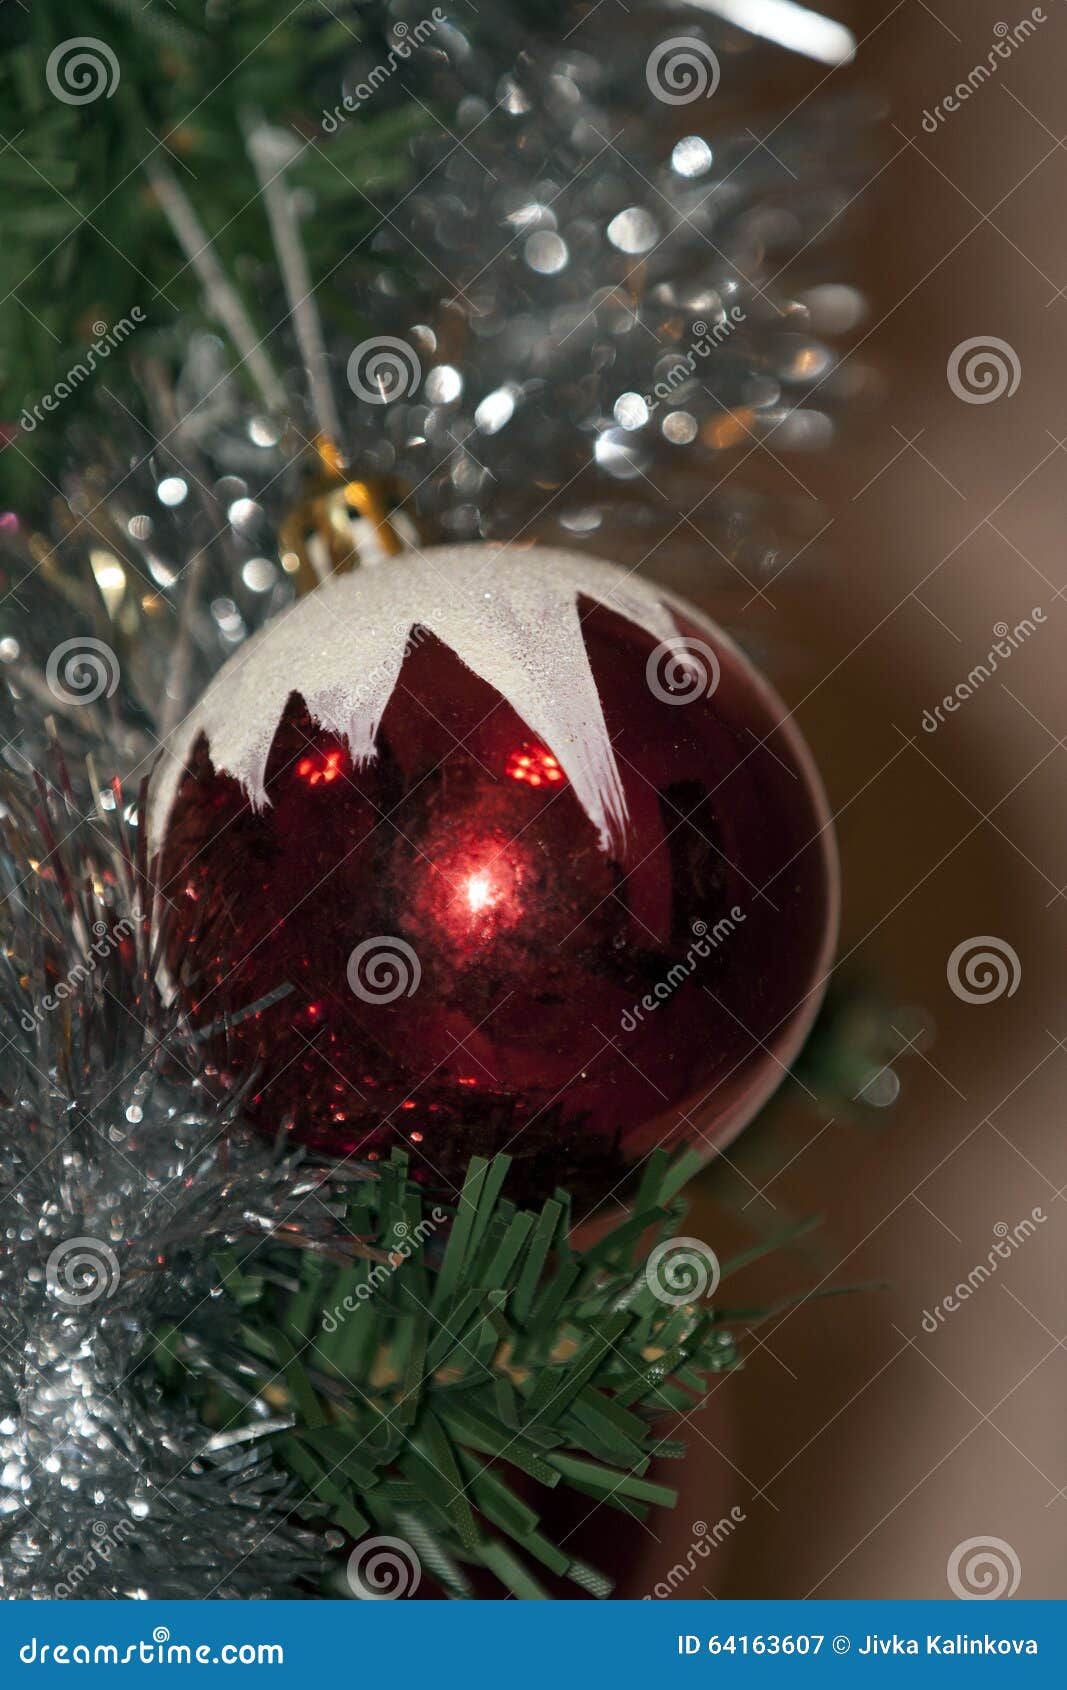 Christmas ornament stock image. Image of color, gift - 64163607